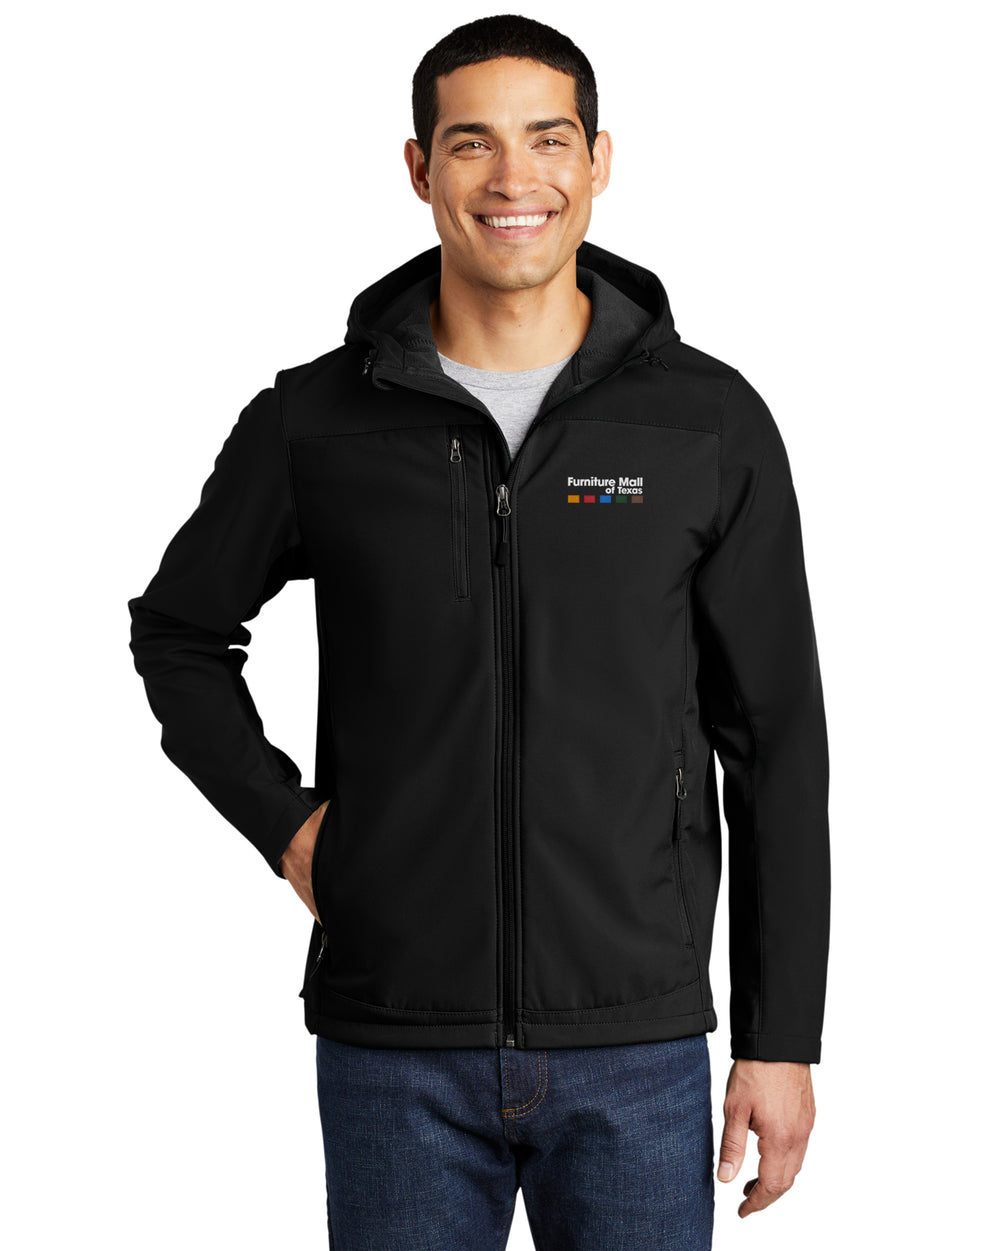 Furniture Mall of Texas - Port Authority Hooded Core Soft Shell Jacket - J335